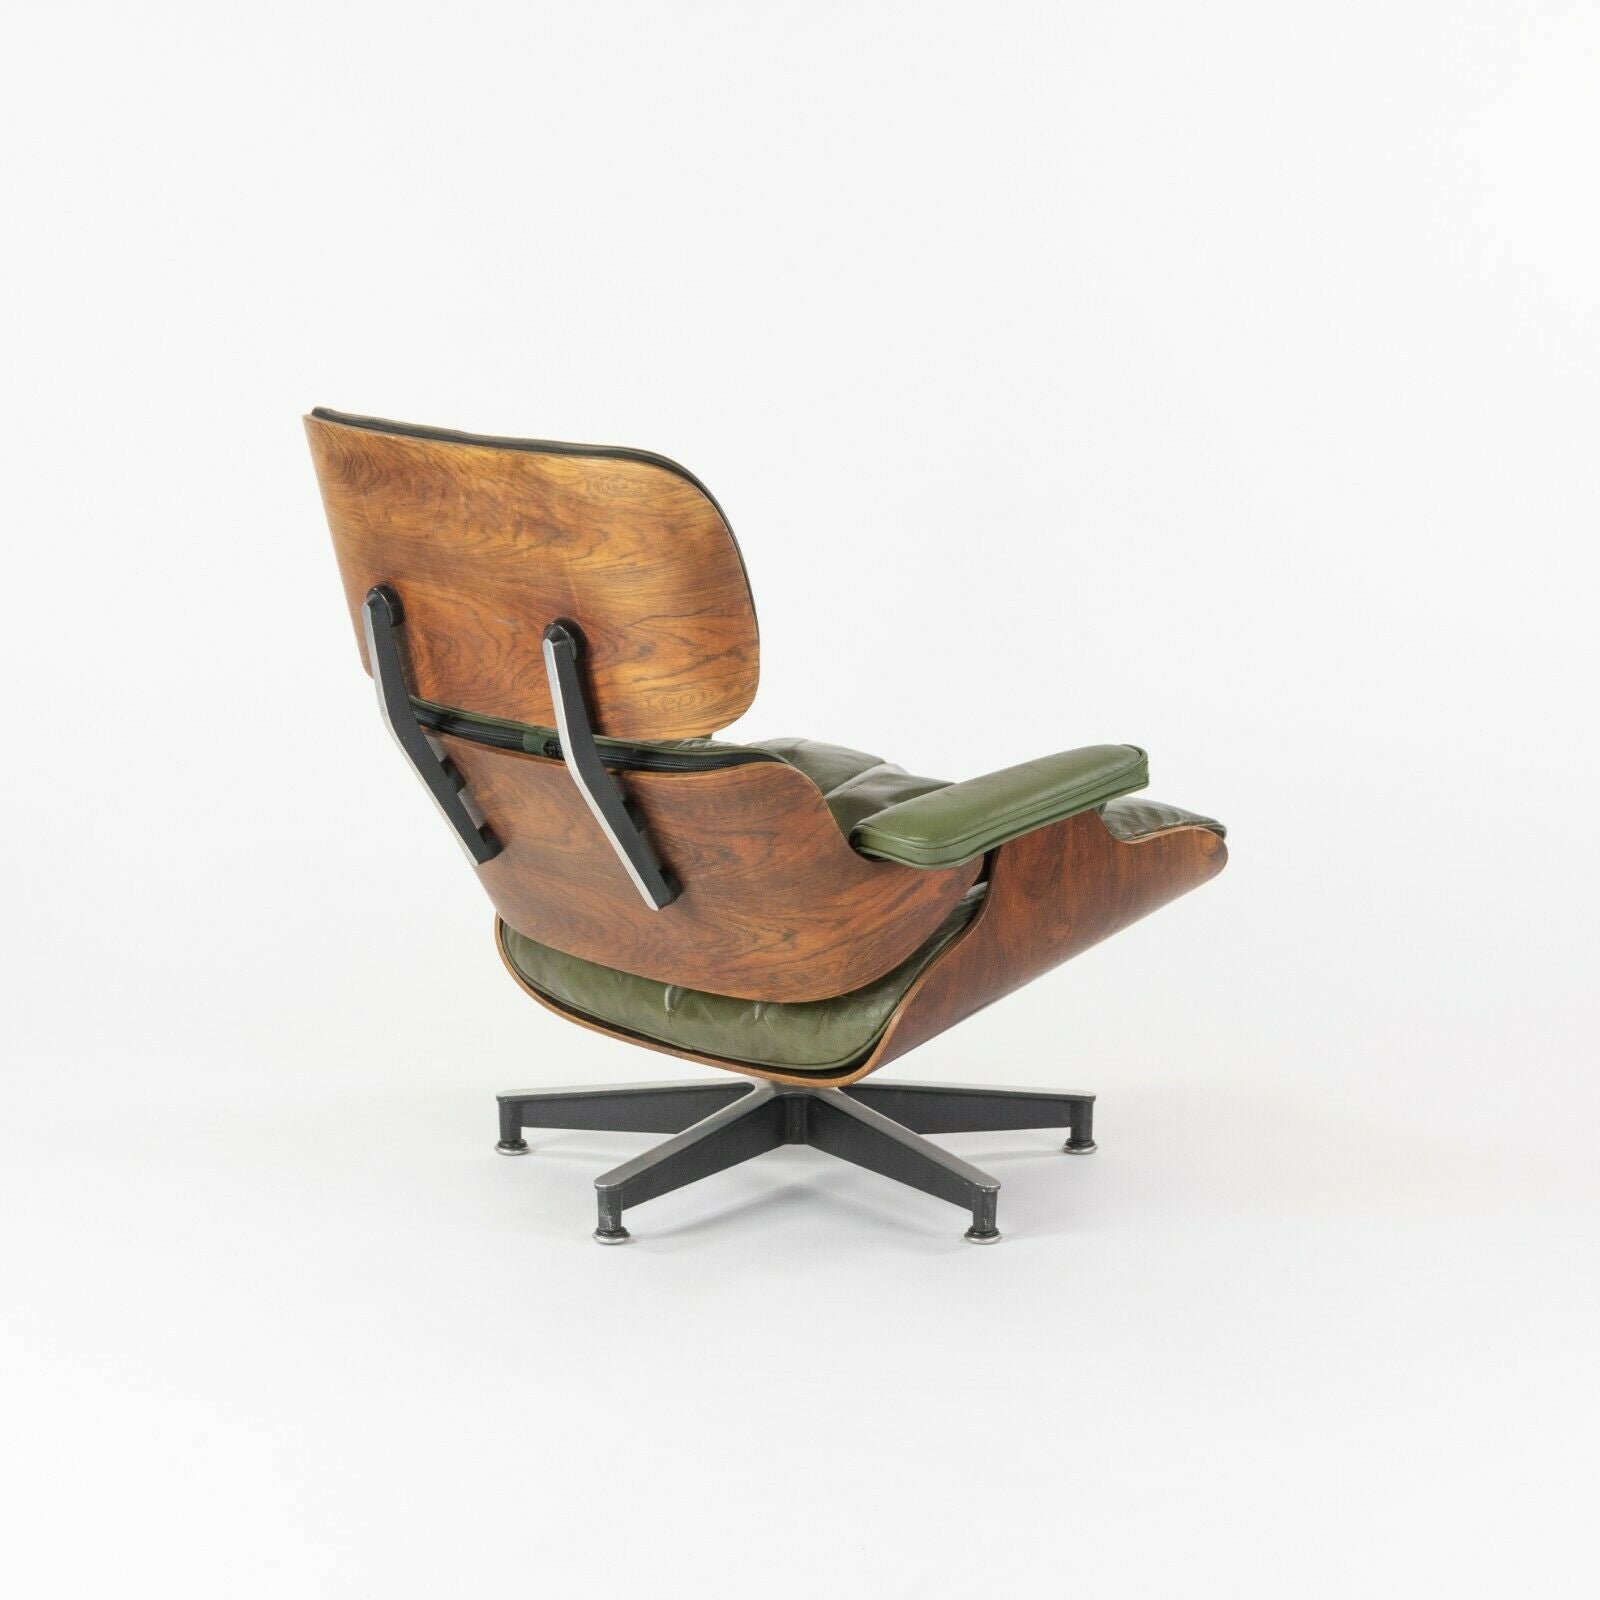 SOLD 1956 Herman Miller Eames Lounge Chair and Ottoman 670 671 in Green with Boot Glides